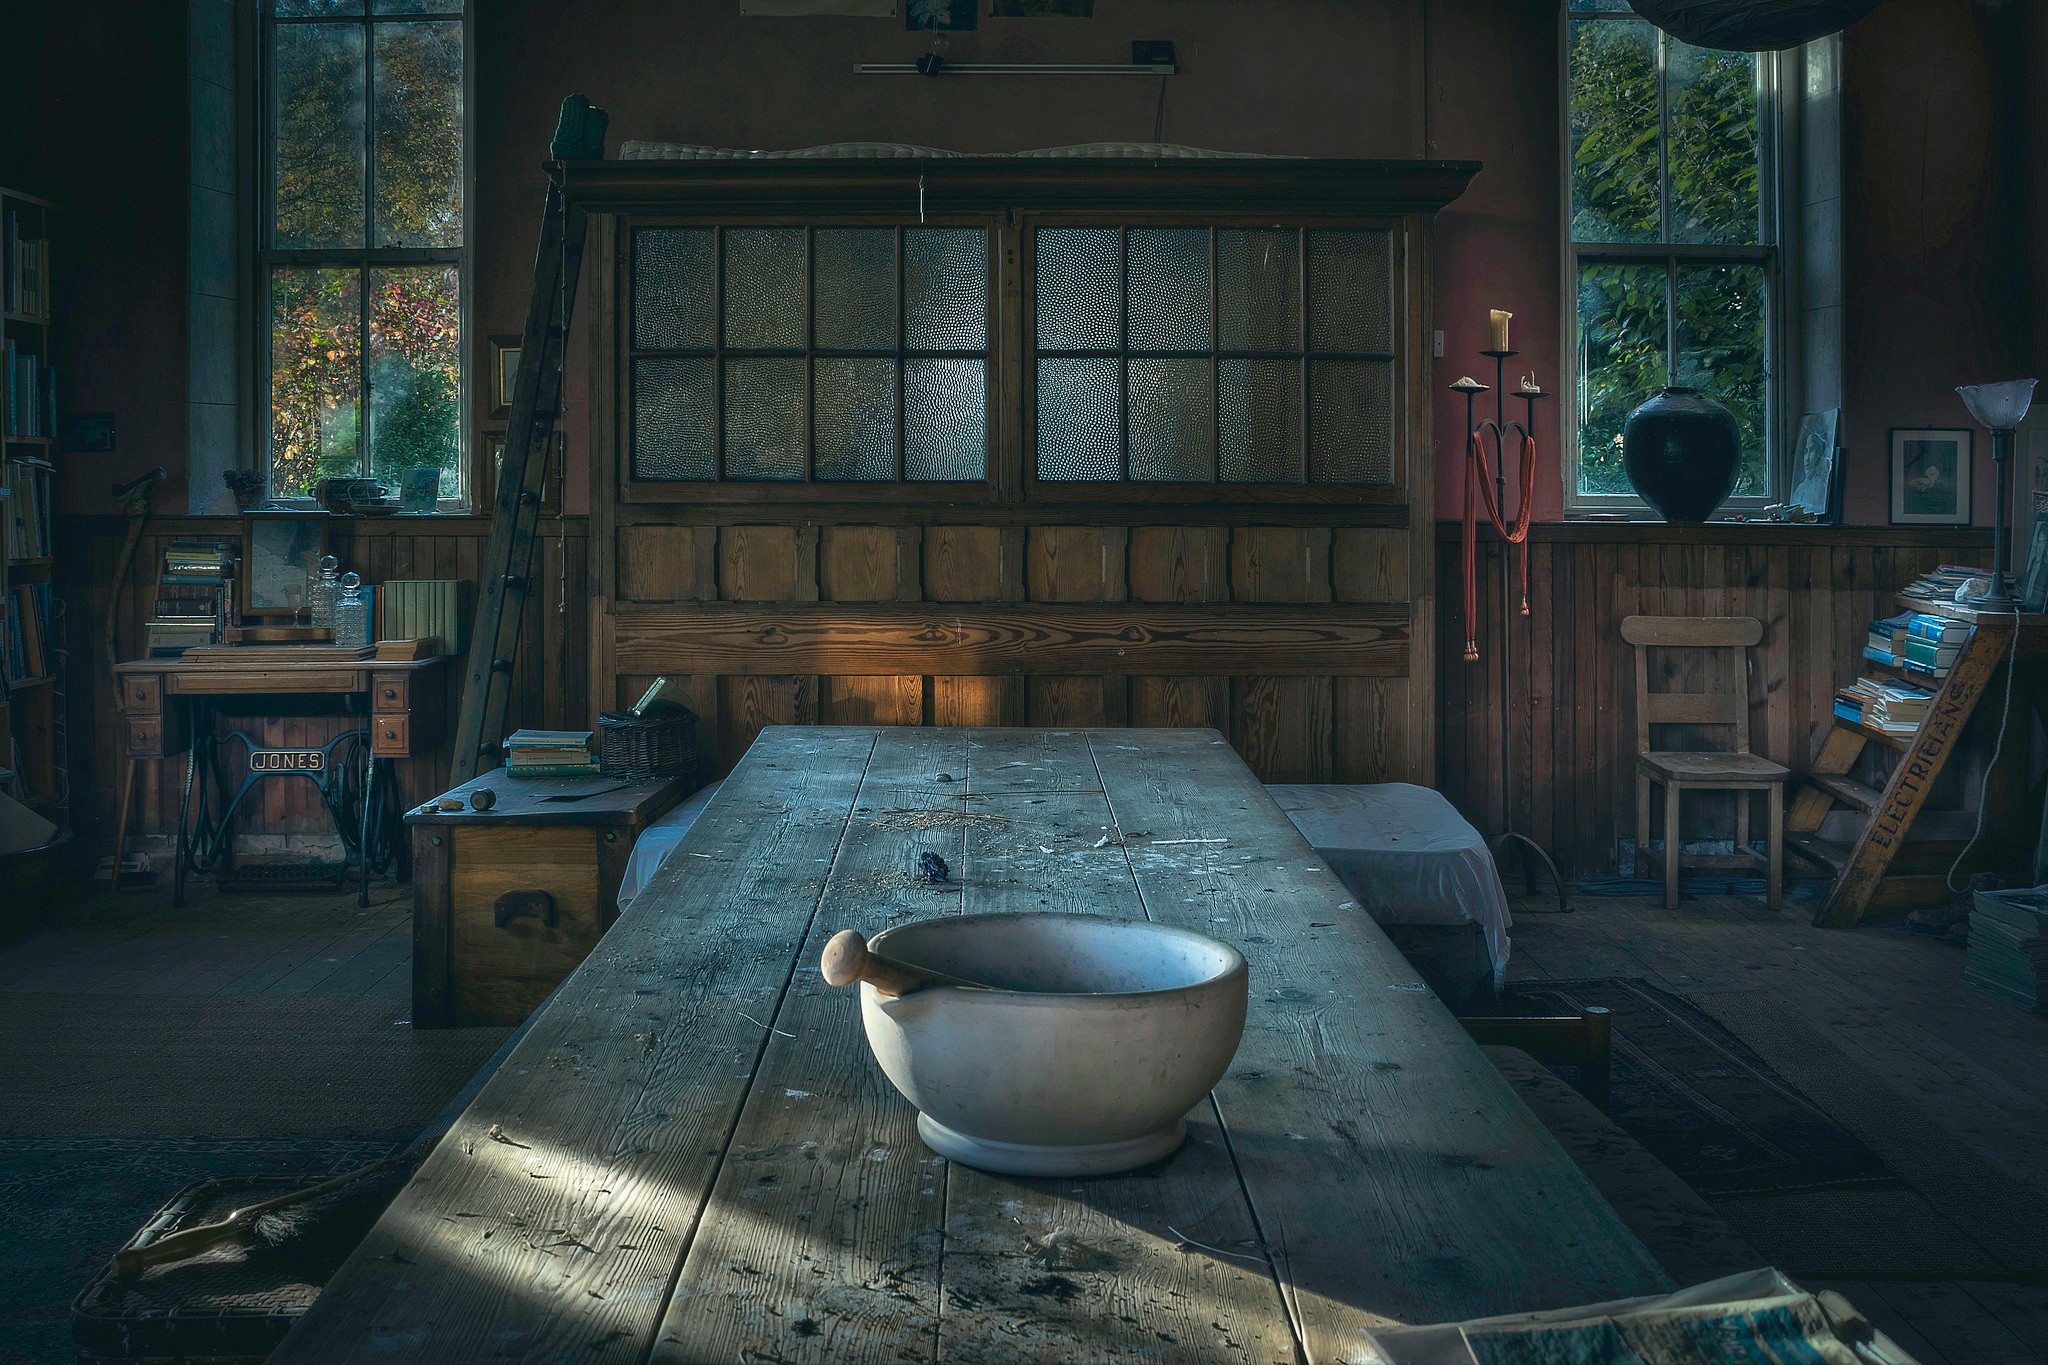 General 2048x1365 interior old building wooden surface indoors room